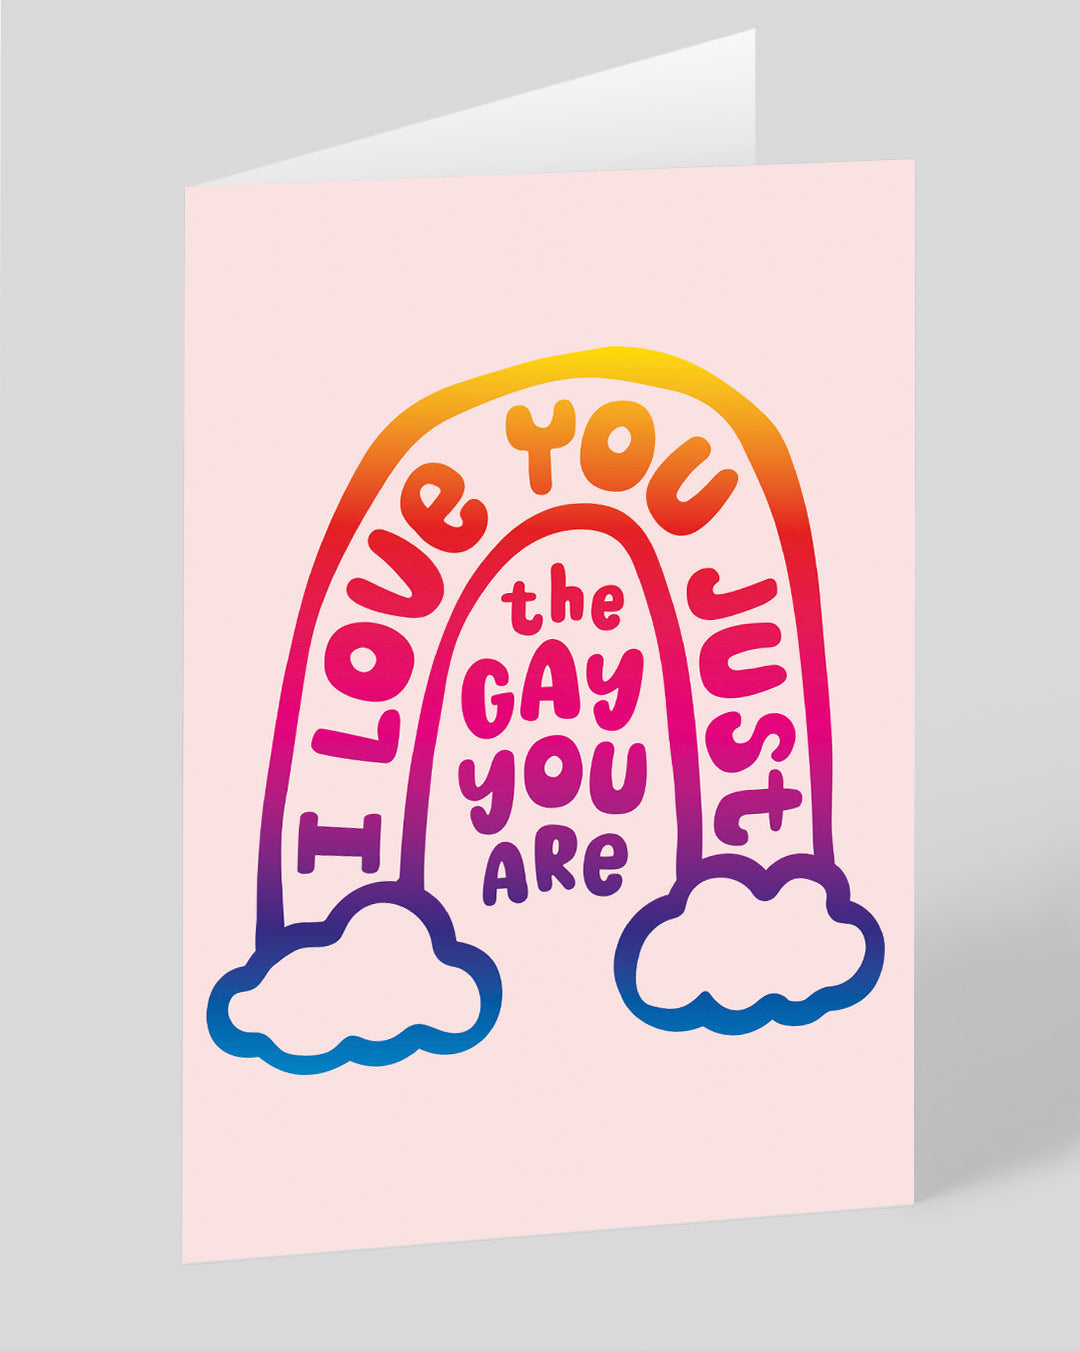 Valentine’s Day | Funny Valentines Card For Him or Her | Love You Just The Gay You Are Greeting Card | Ohh Deer Unique Valentine’s Card | Made In The UK, Eco-Friendly Materials, Plastic Free Packaging